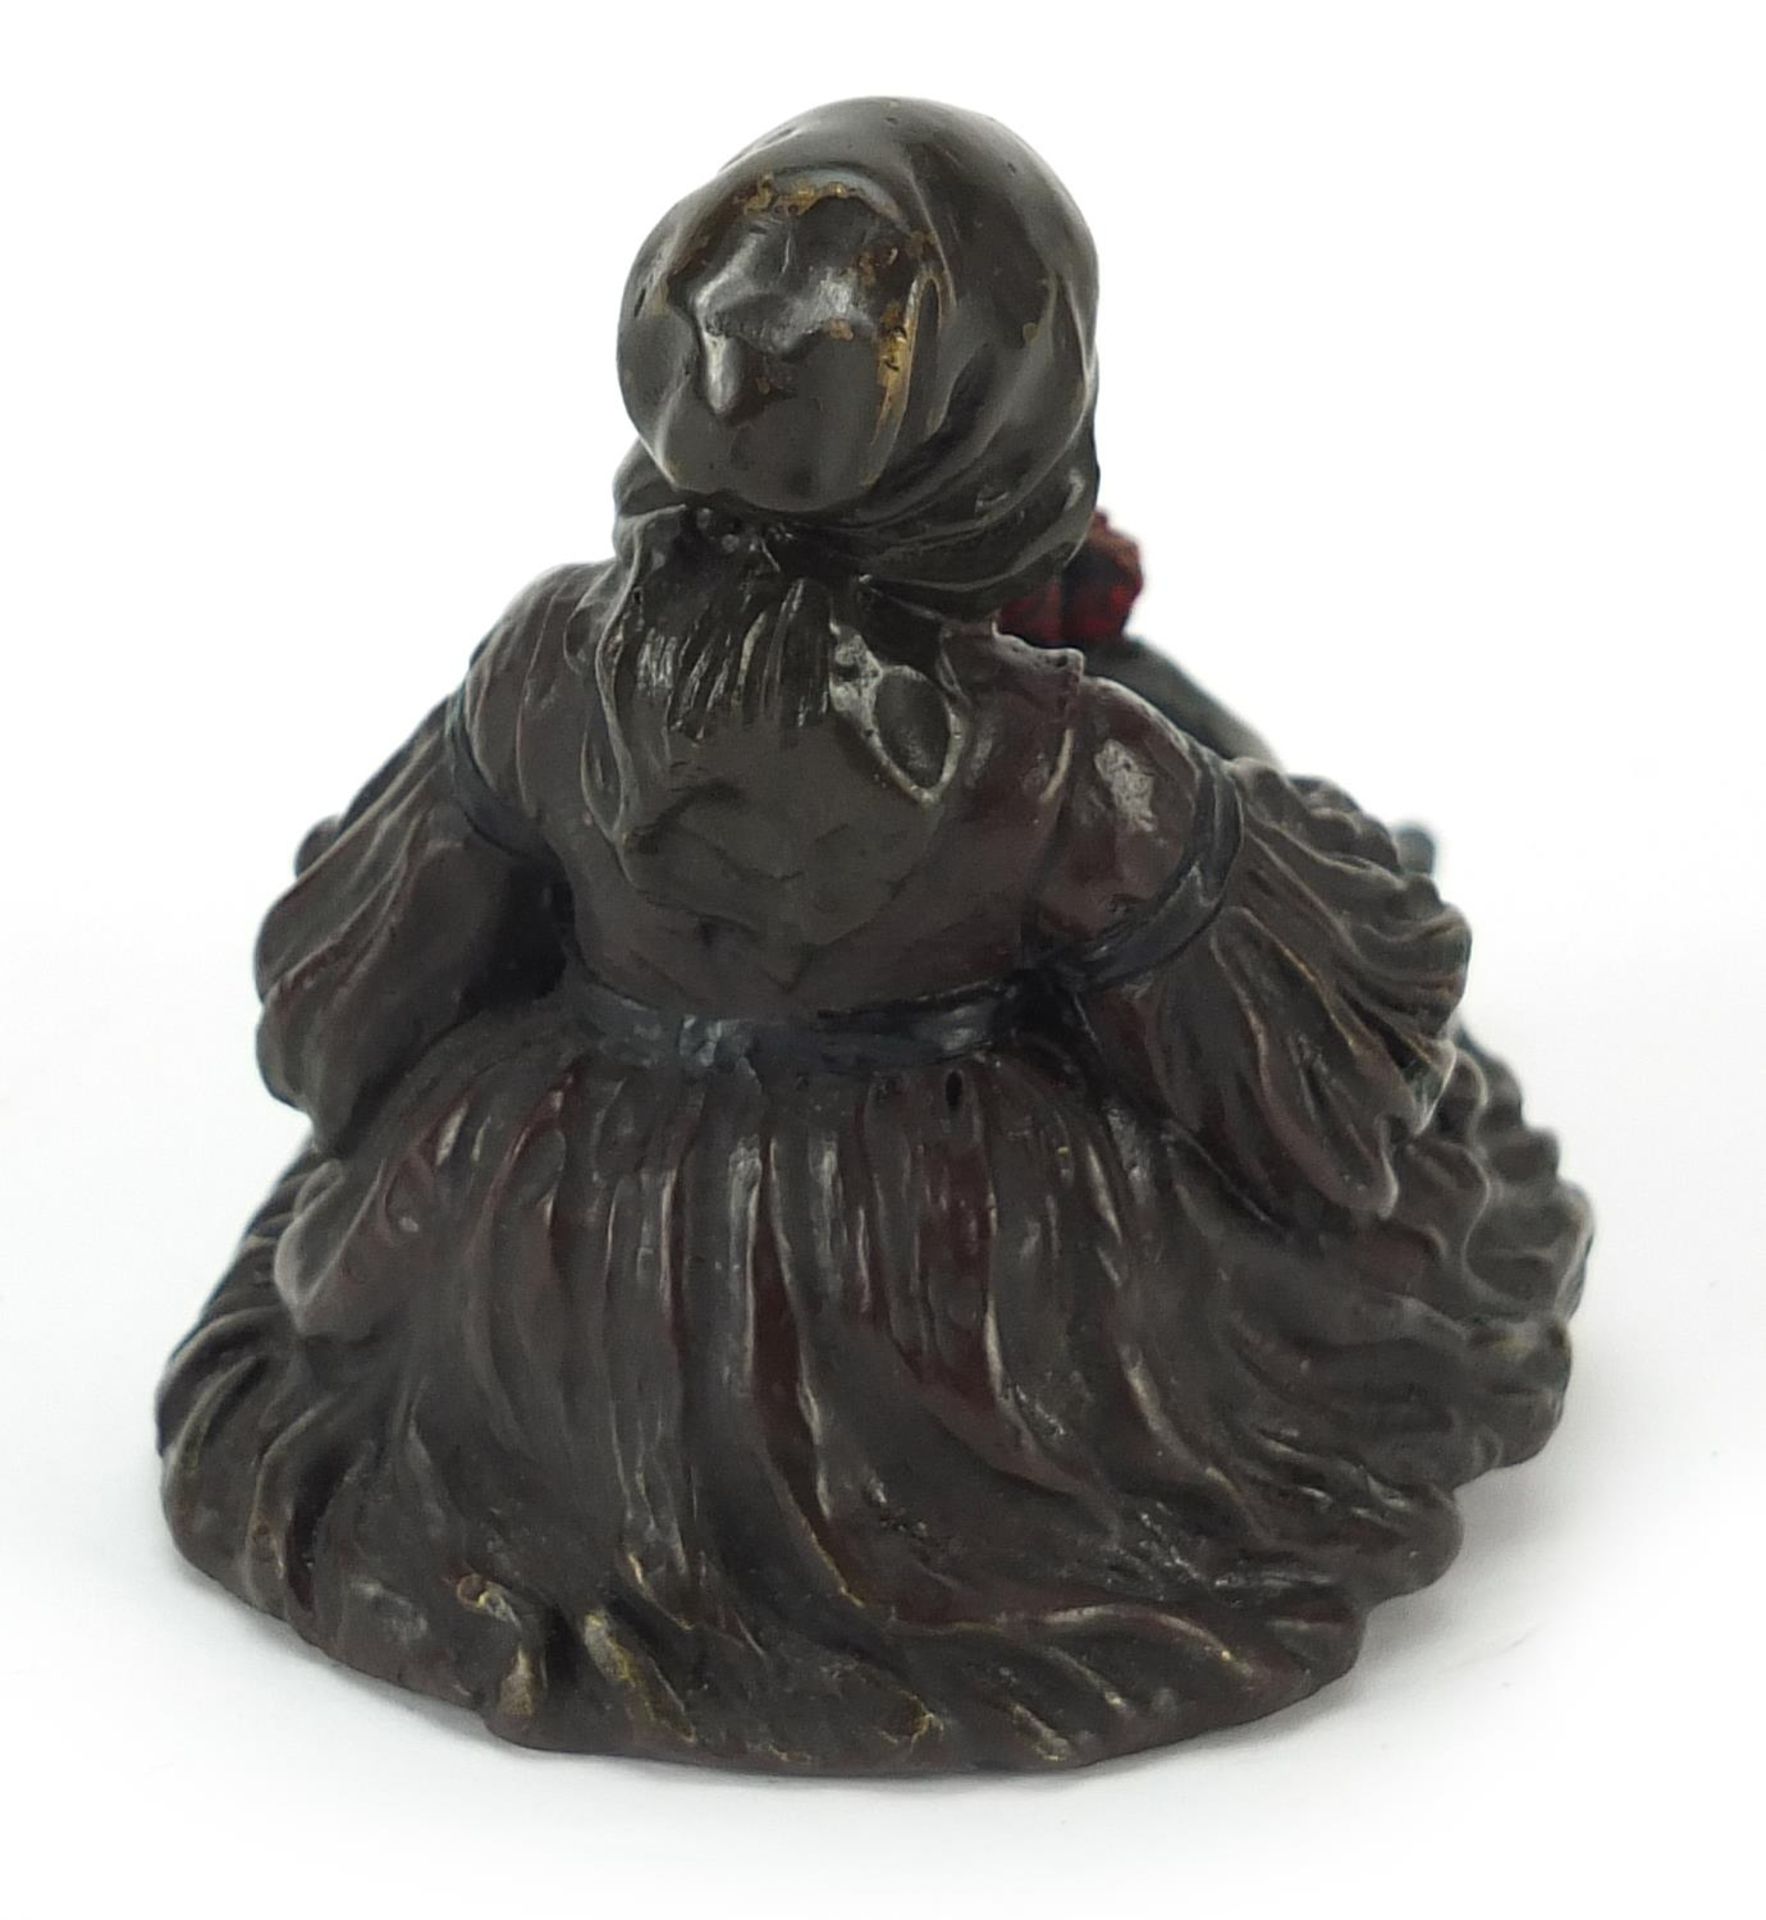 Cold painted bronze erotic figurine seated in a dress, 11cm in length - Image 2 of 3